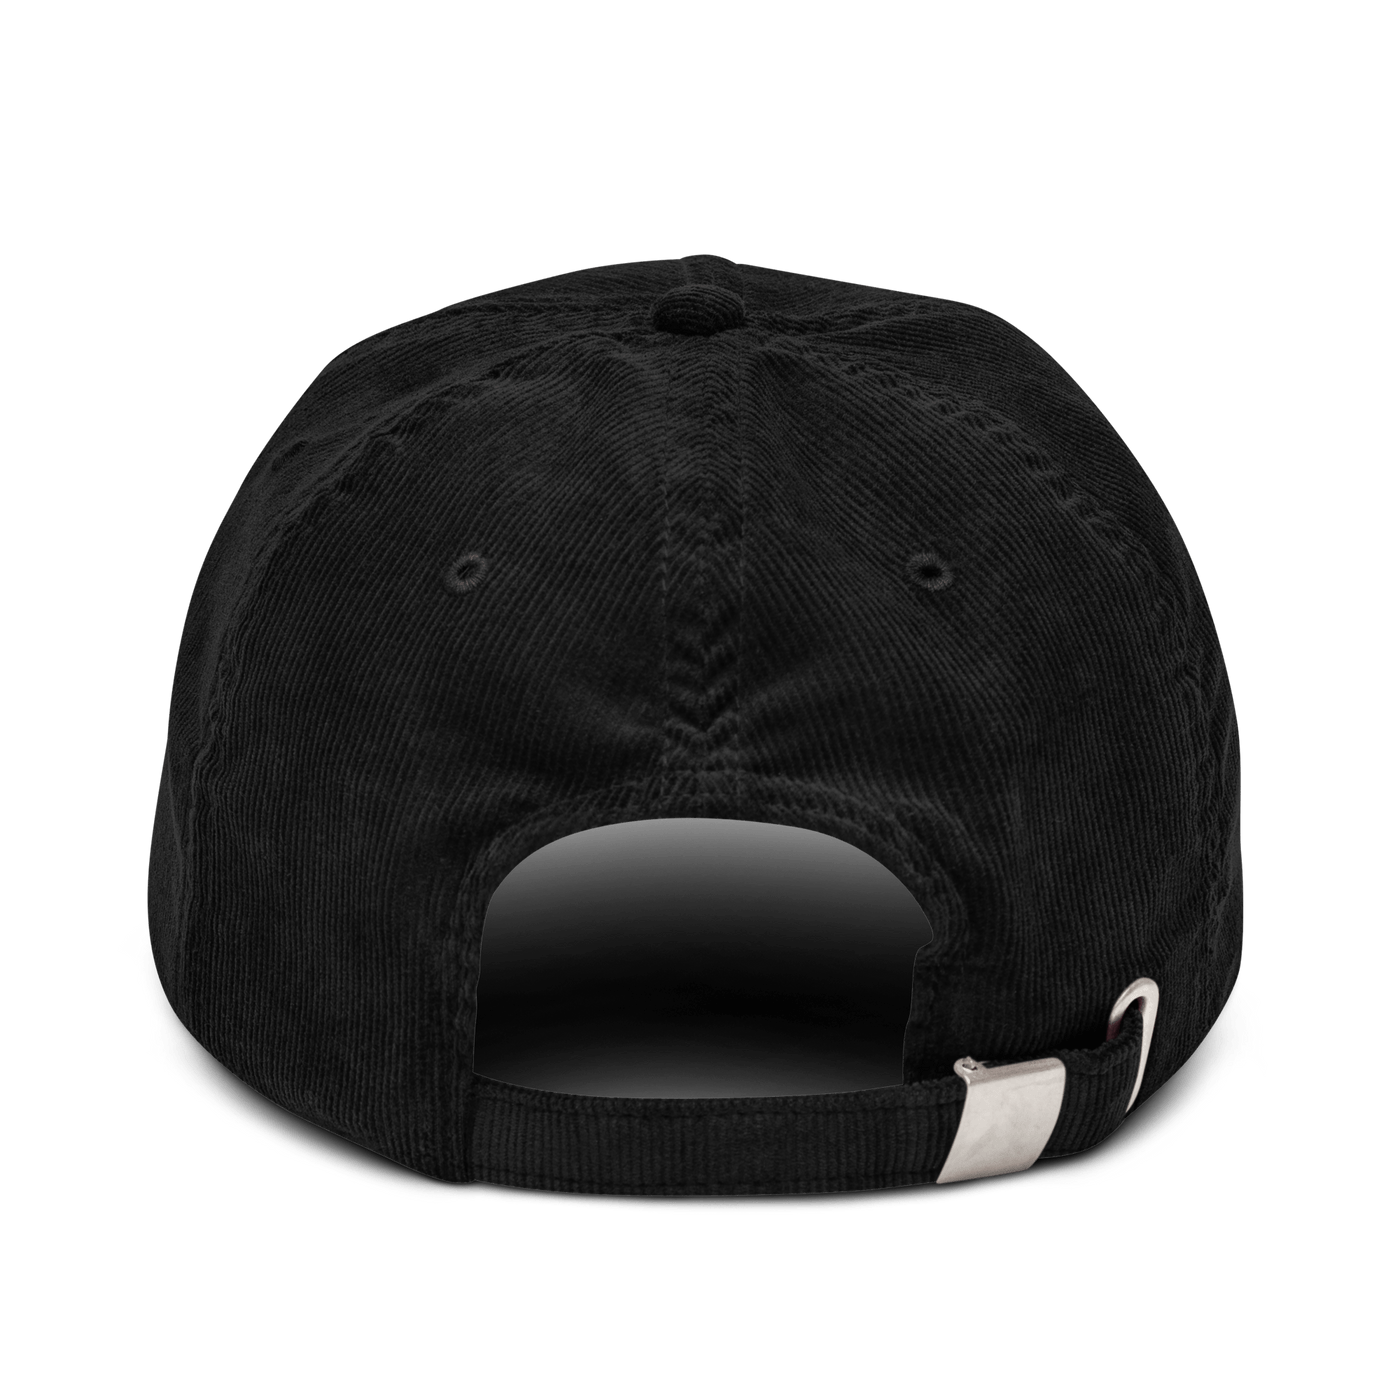 Future Milf Corduroy hat - Black - - Just Another Cap Store